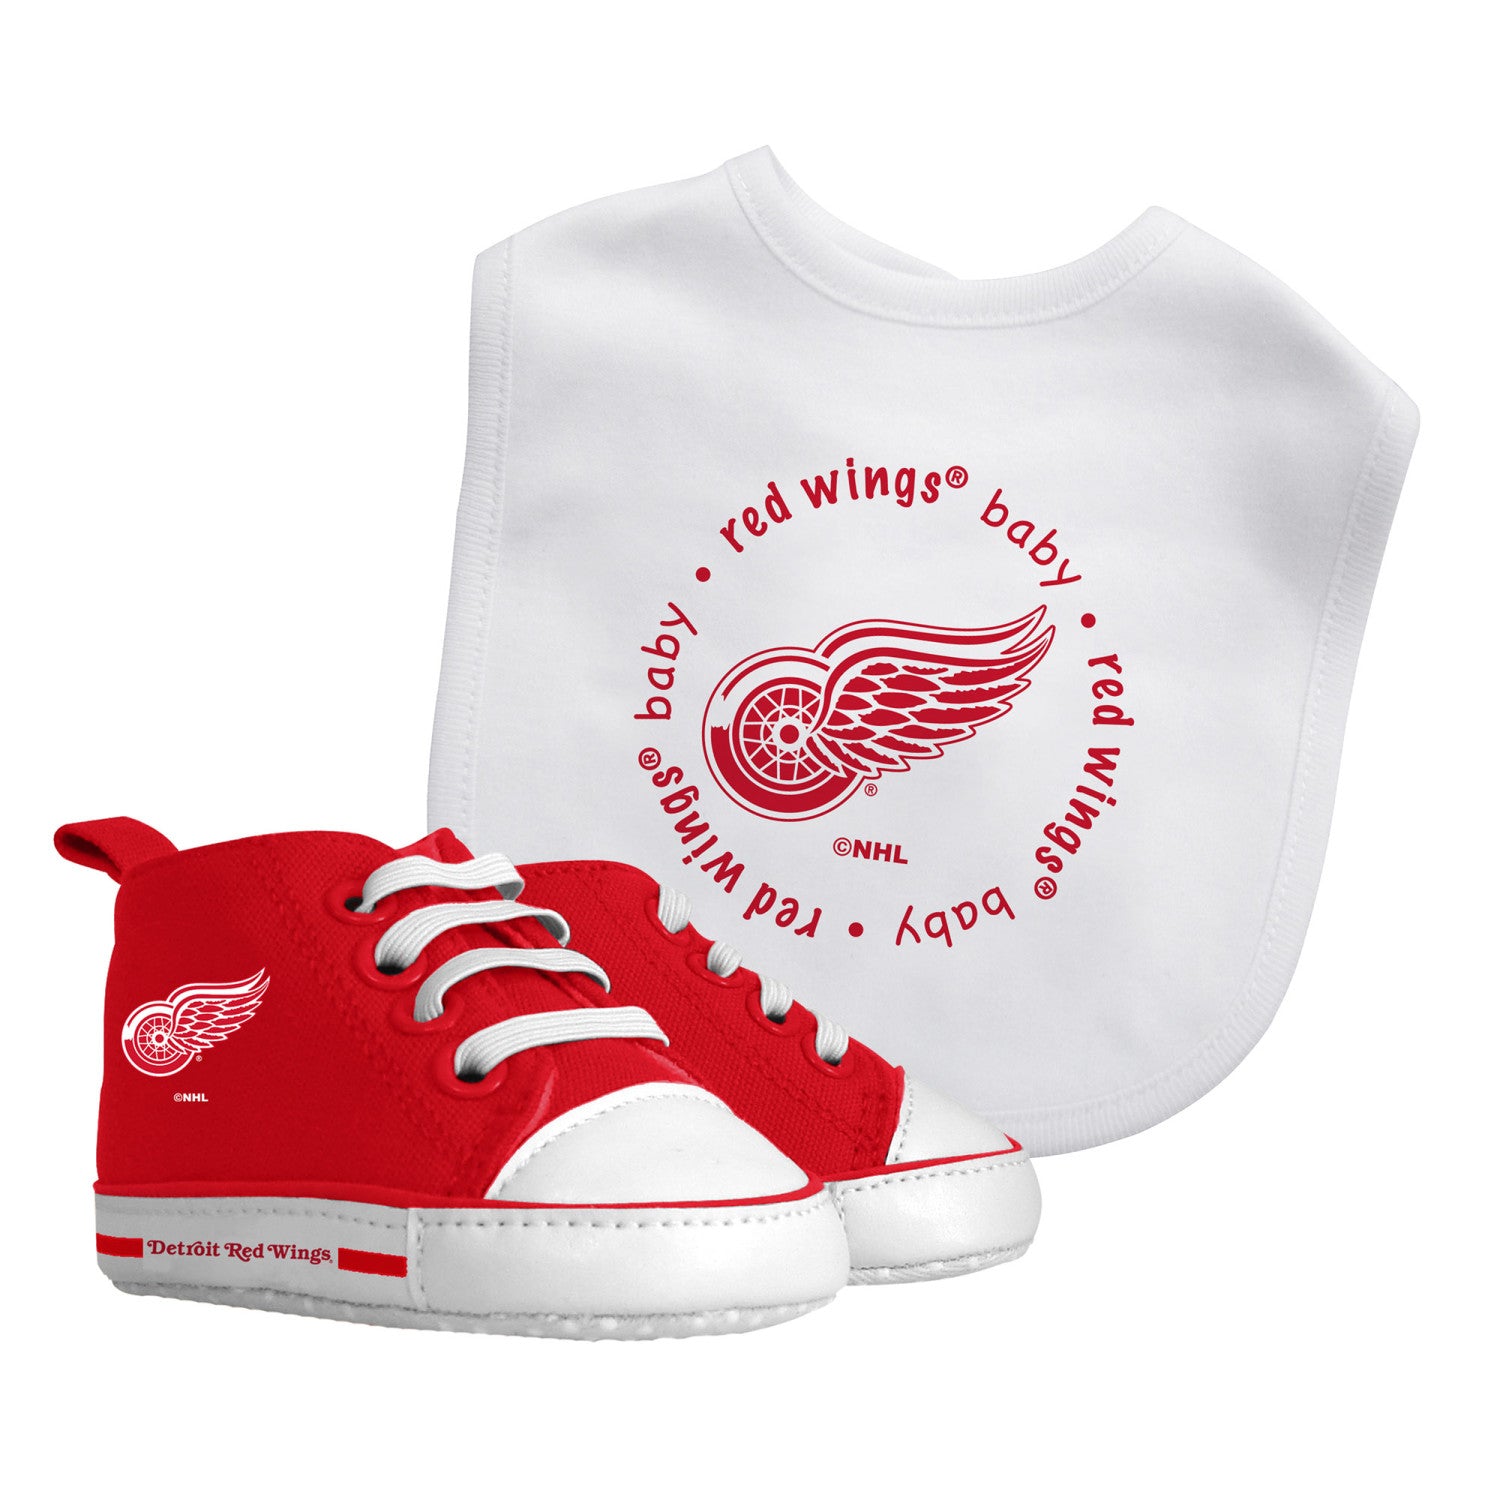 Detroit Red Wings - 2-Piece Baby Gift Set